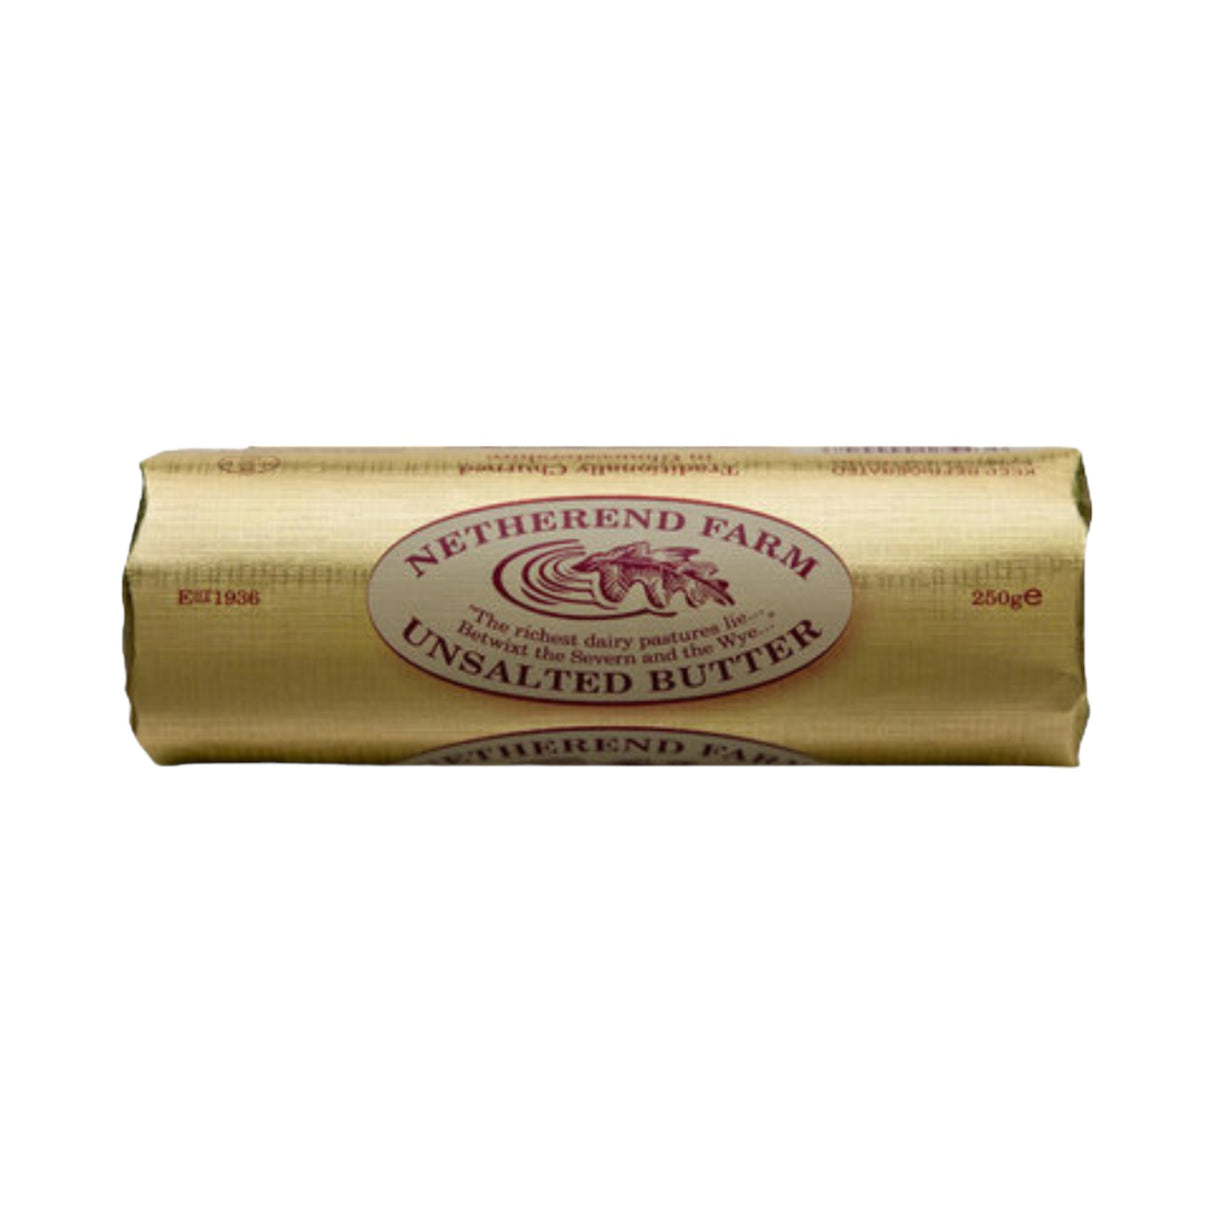 Netherend - Unsalted Butter Roll 250g